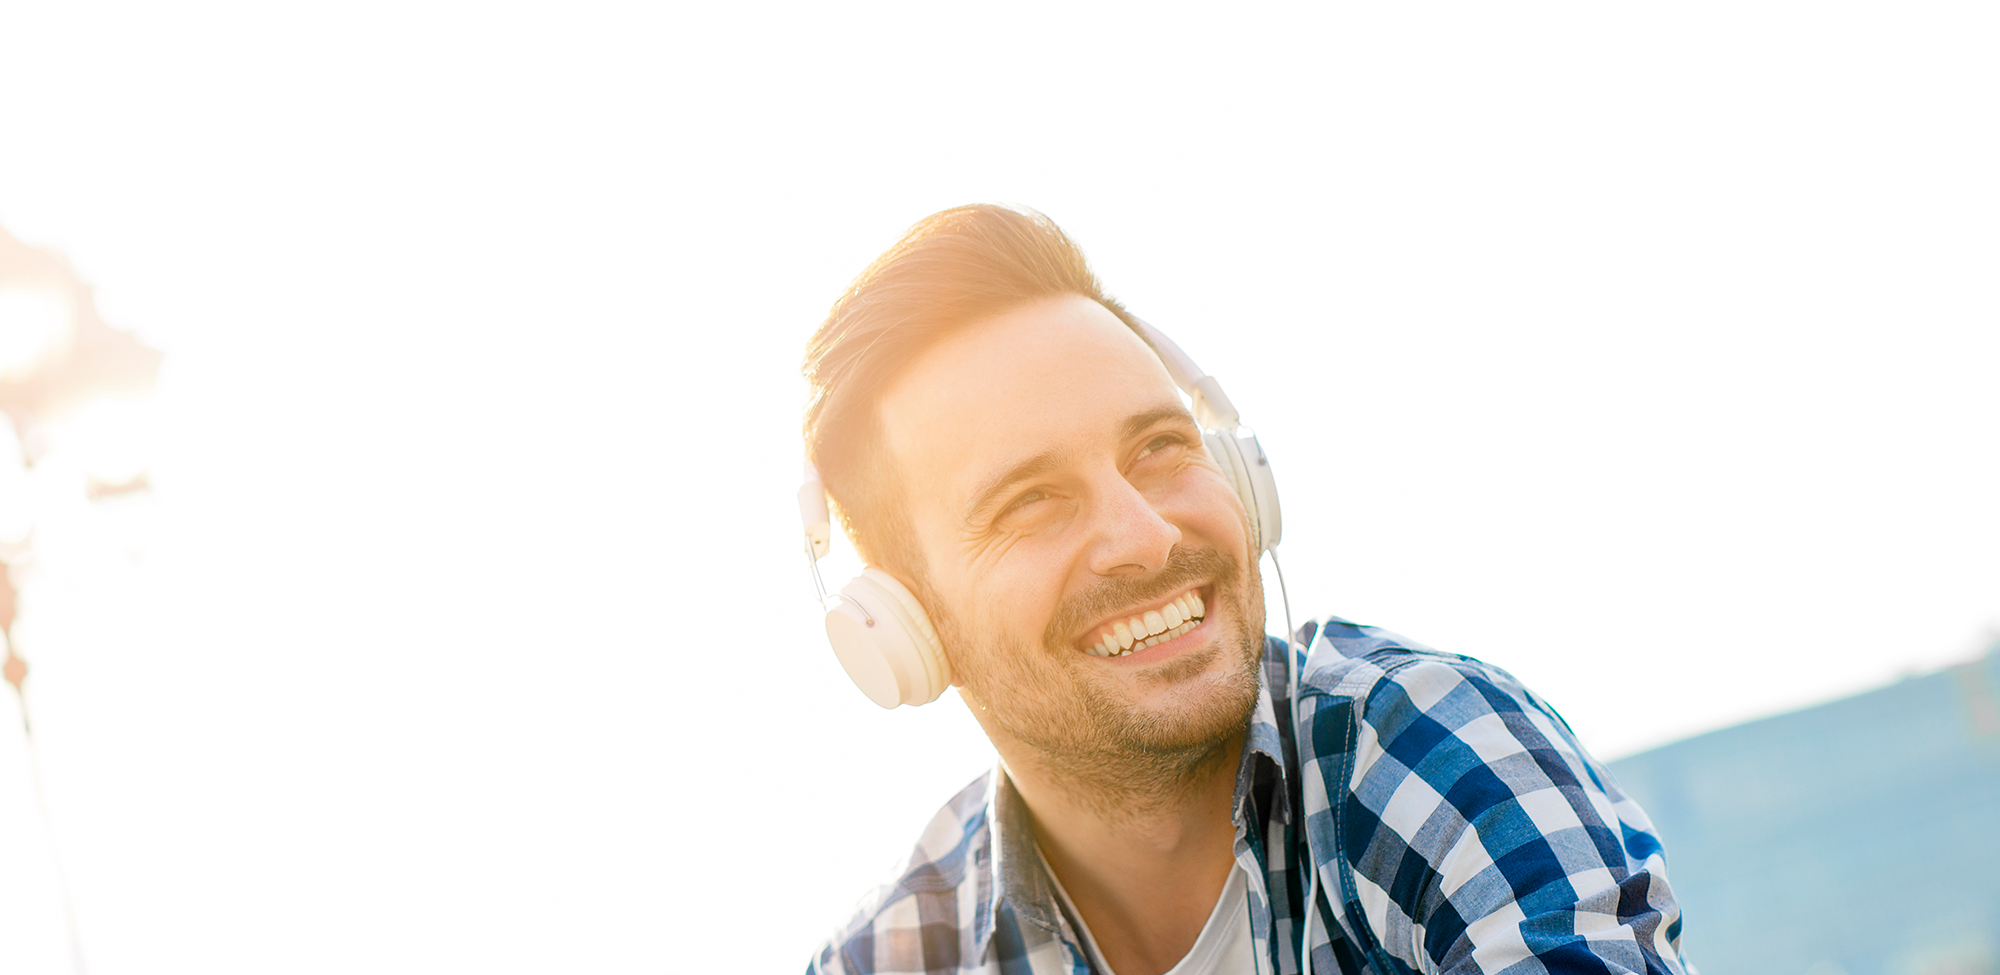 A man wearing headphones, listening to music and smiling